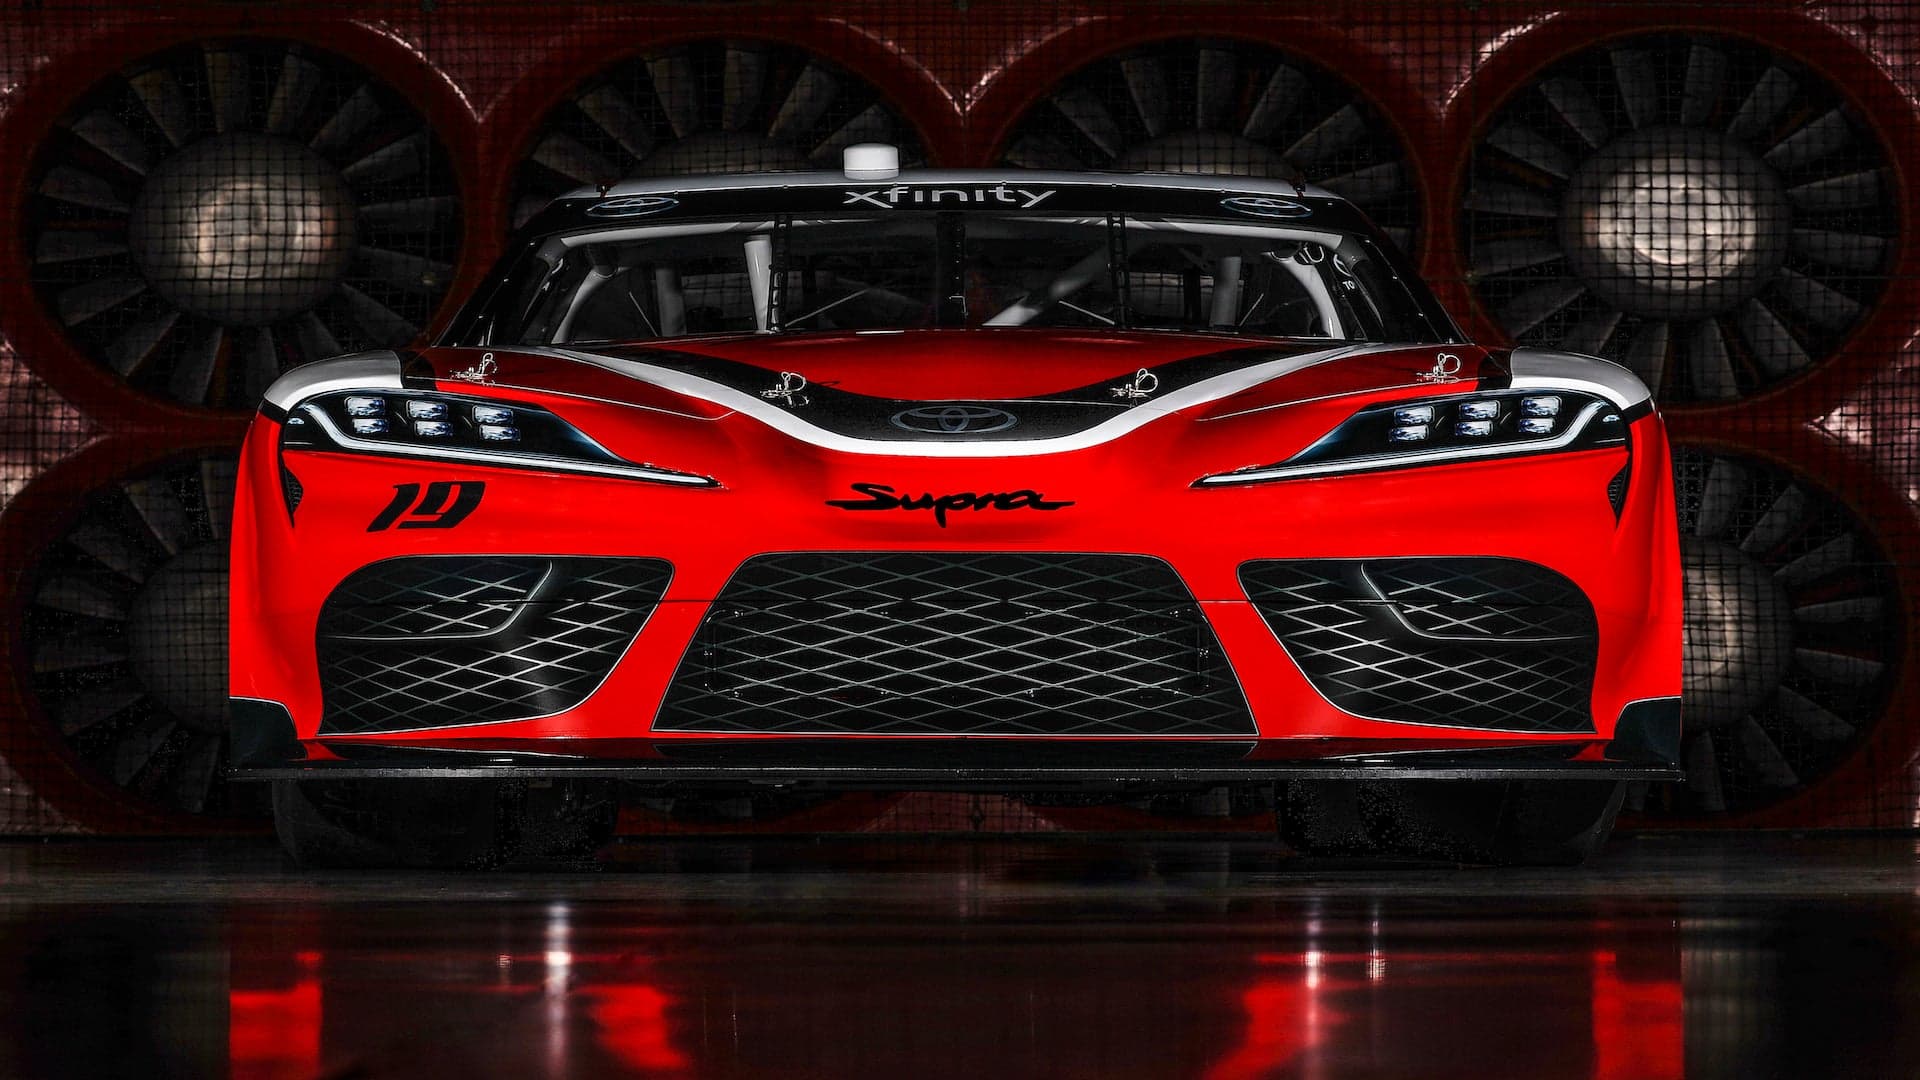 Confirmed: Toyota Supra Will Contest NASCAR Xfinity Series in 2019